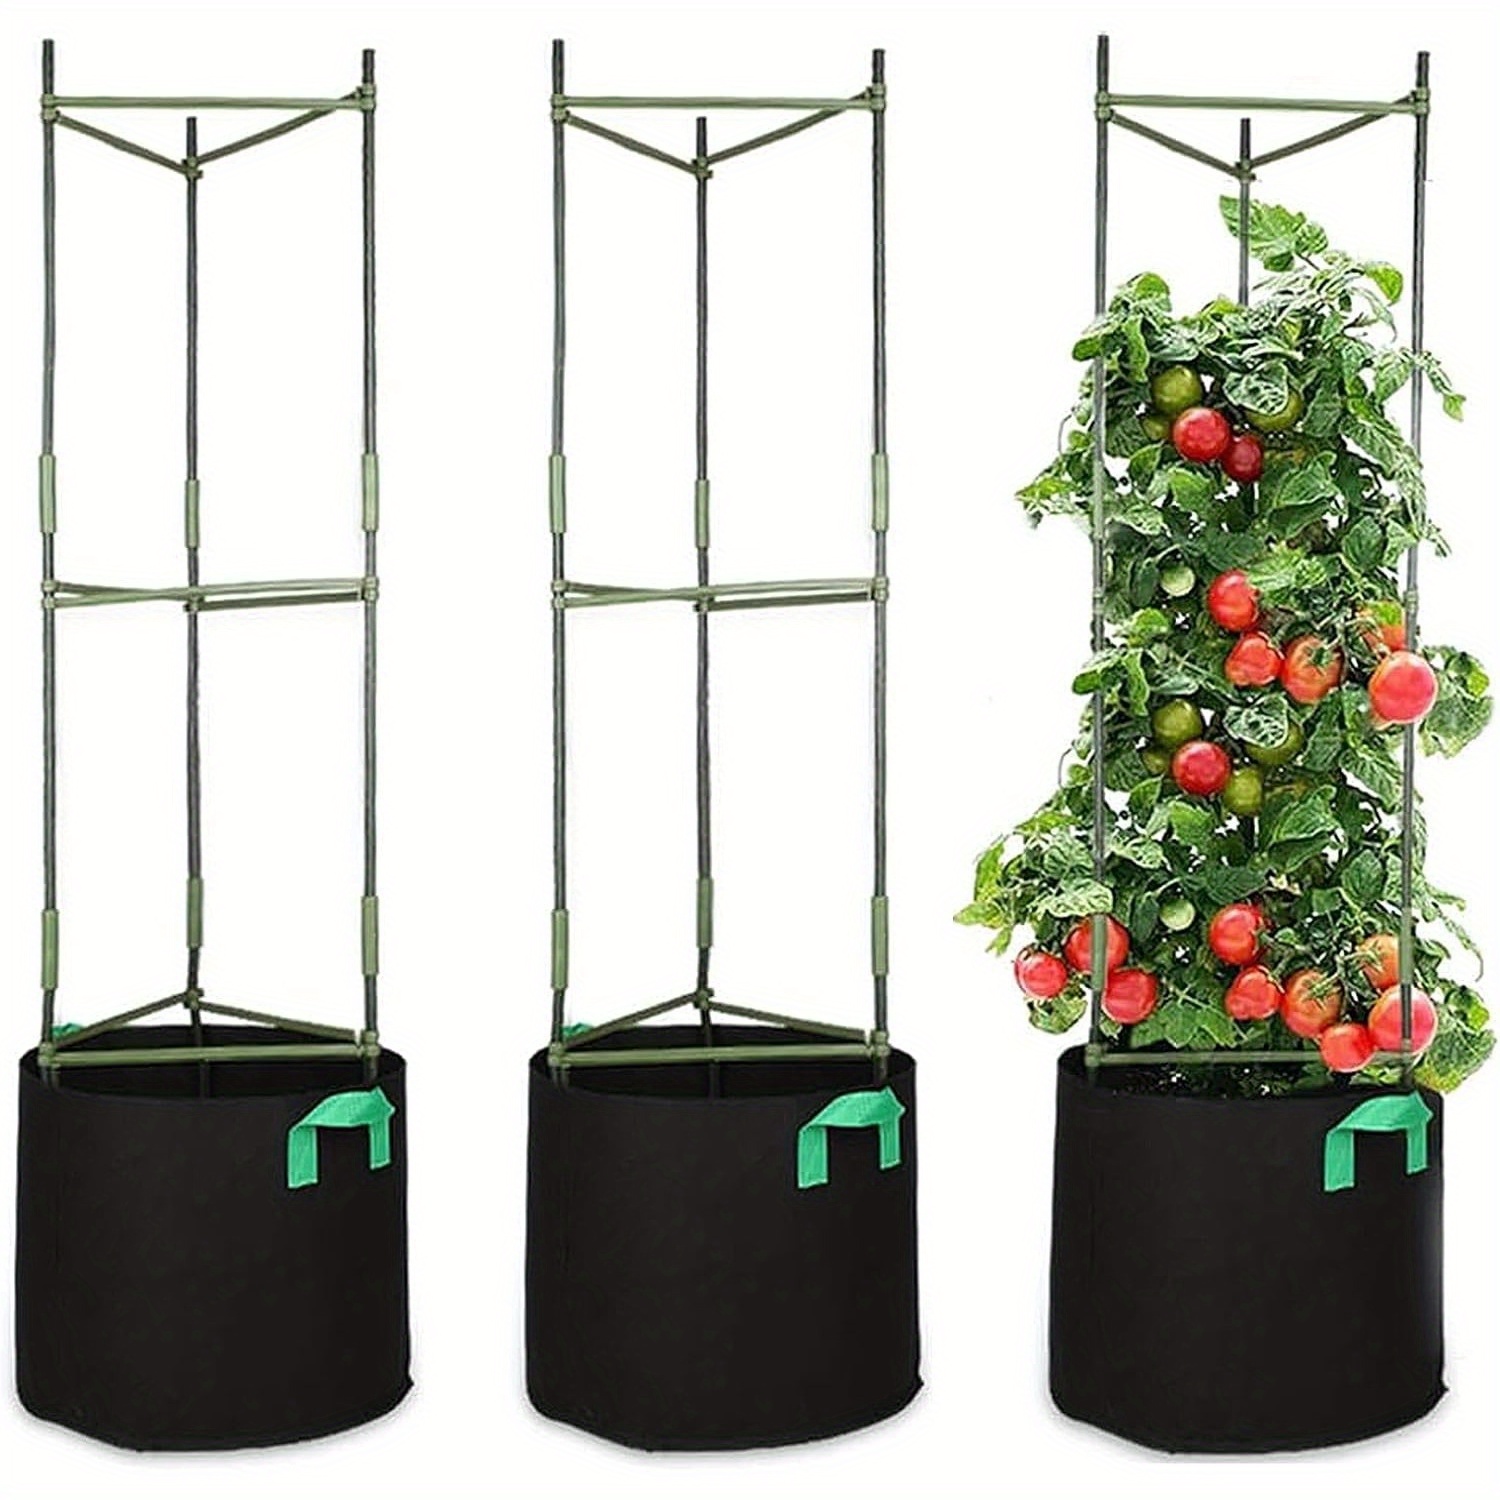 

3 Packs 51 Inches Tomato Cages With 10 Gallon Grow Bags, Tomato Trellis With 9pcs Clips And 328ft Twist Tie, Tomatoes Plant Cage For Vegetable Flowers Fruits Vertical Climbing Plants